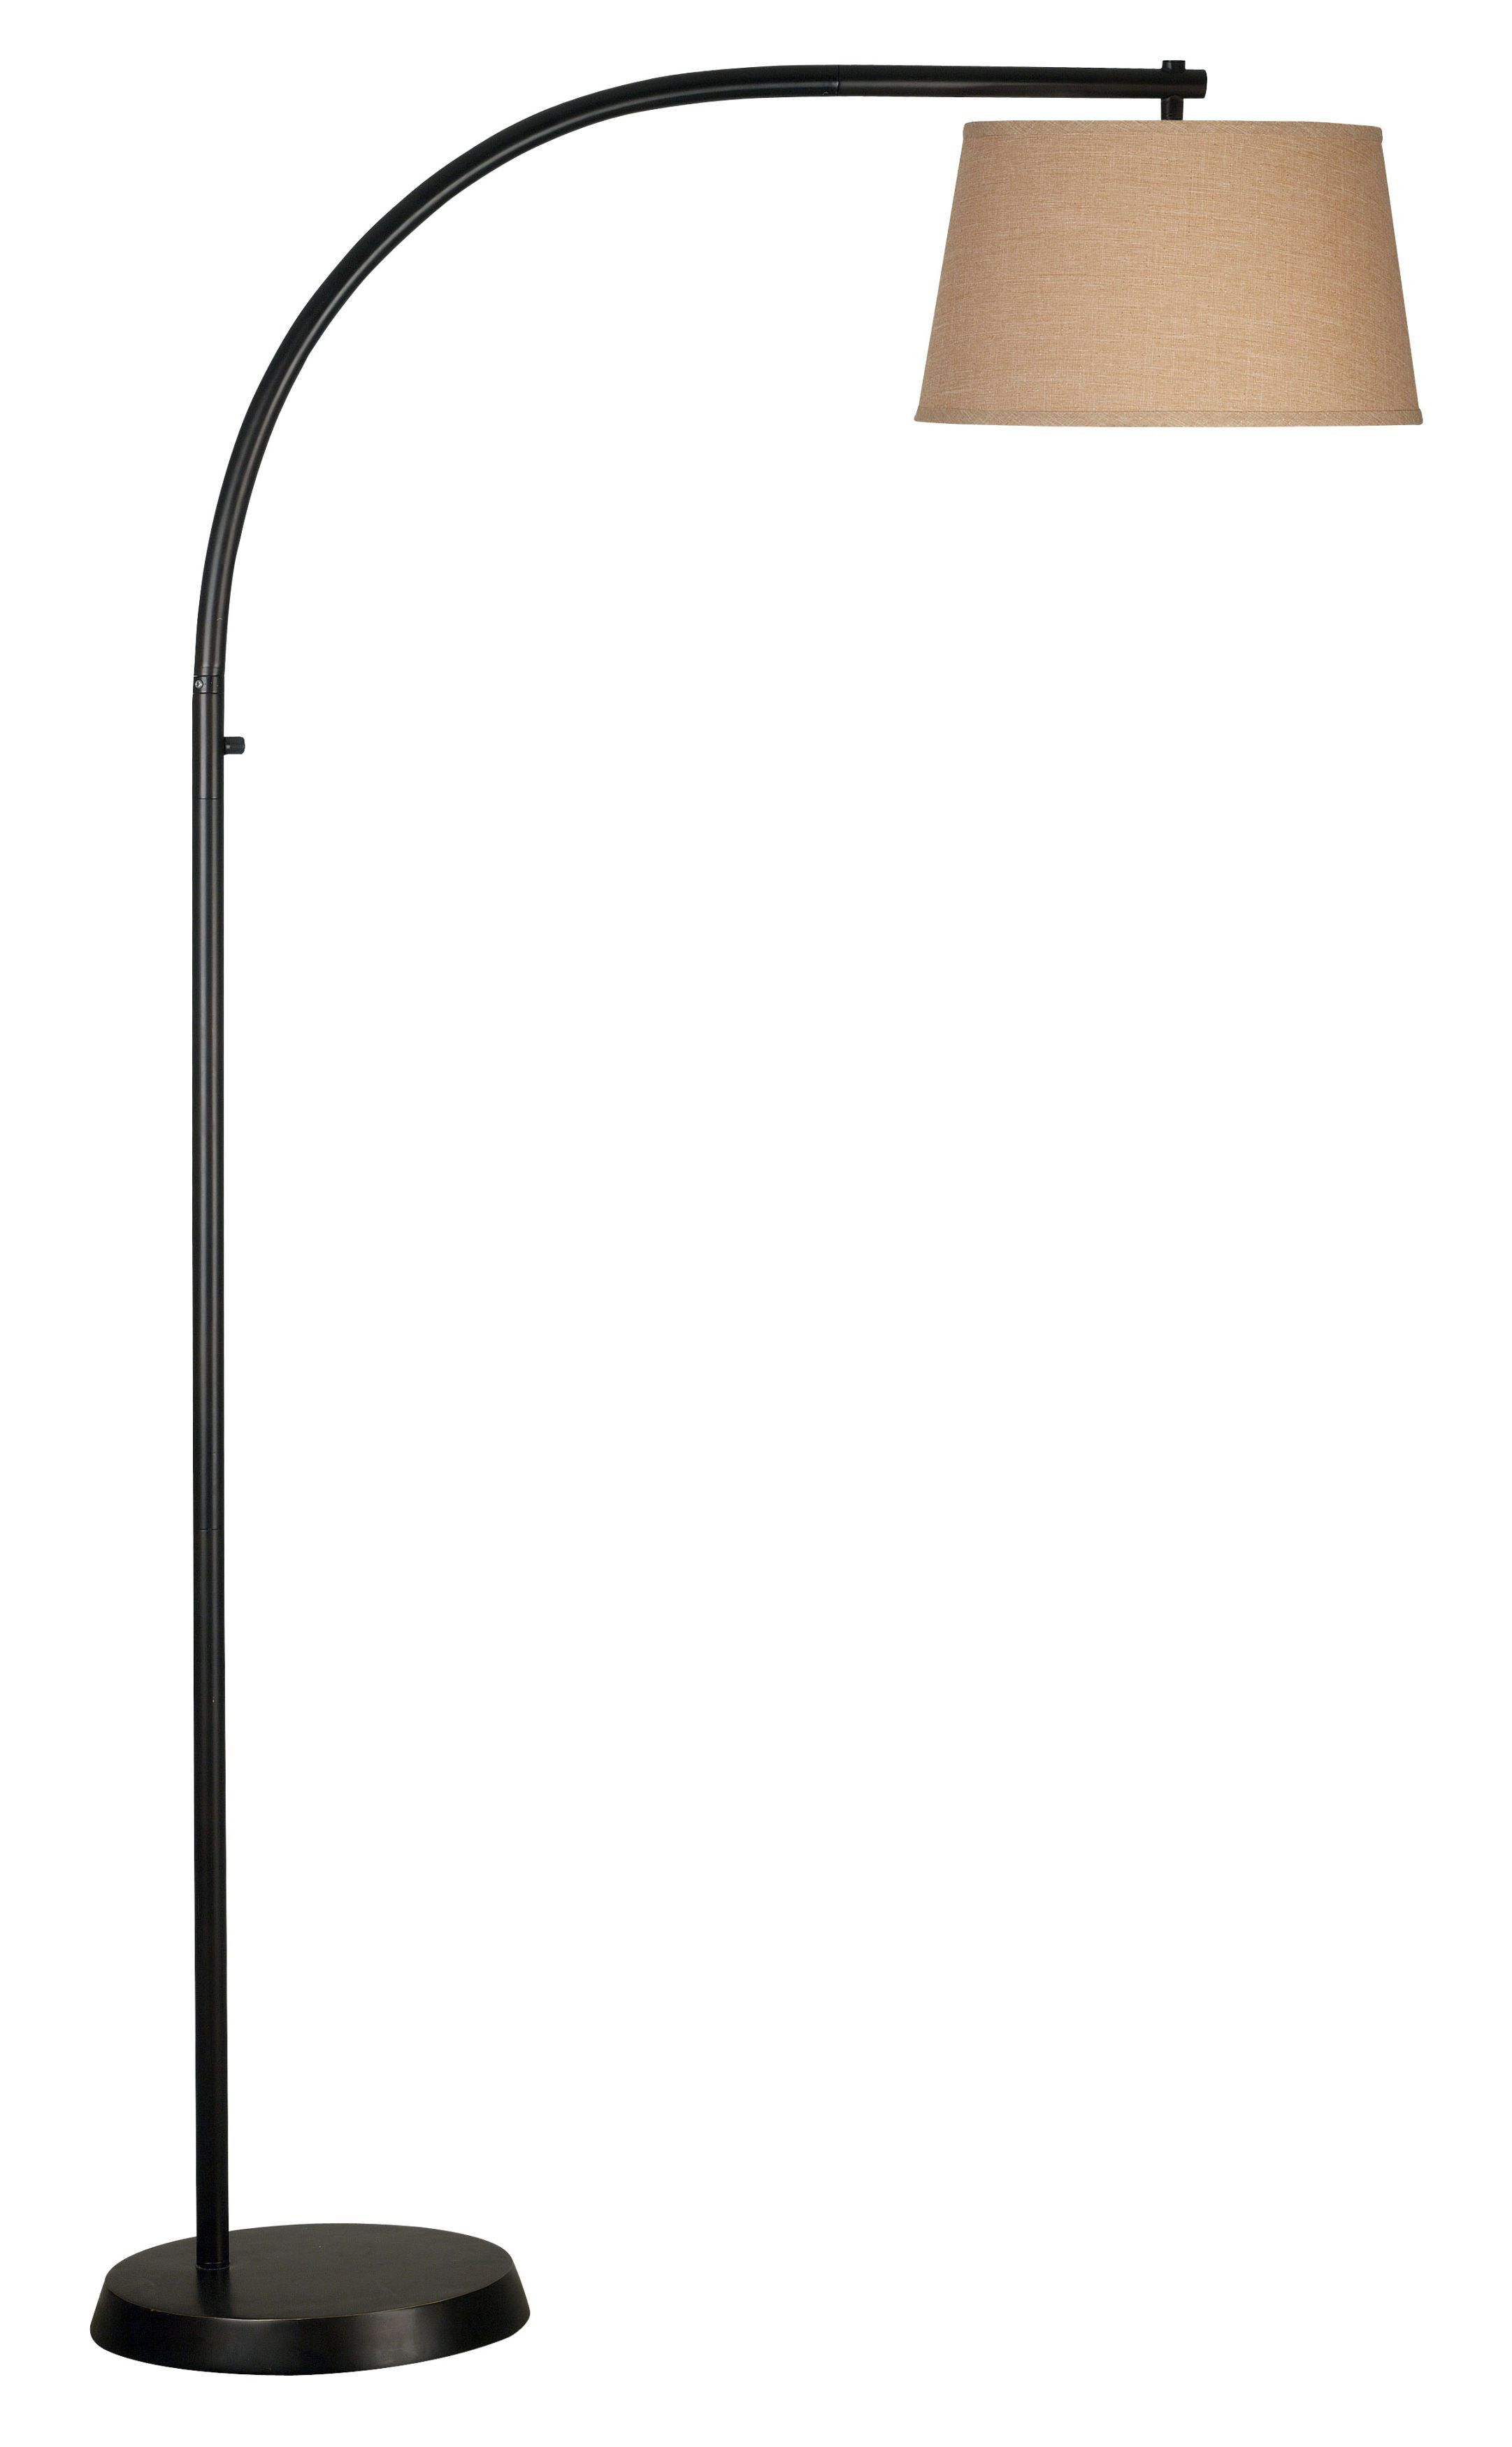 Kenroy Home Sweep Floor Lamp In Oil Rubbed Bronze pertaining to size 2163 X 3500